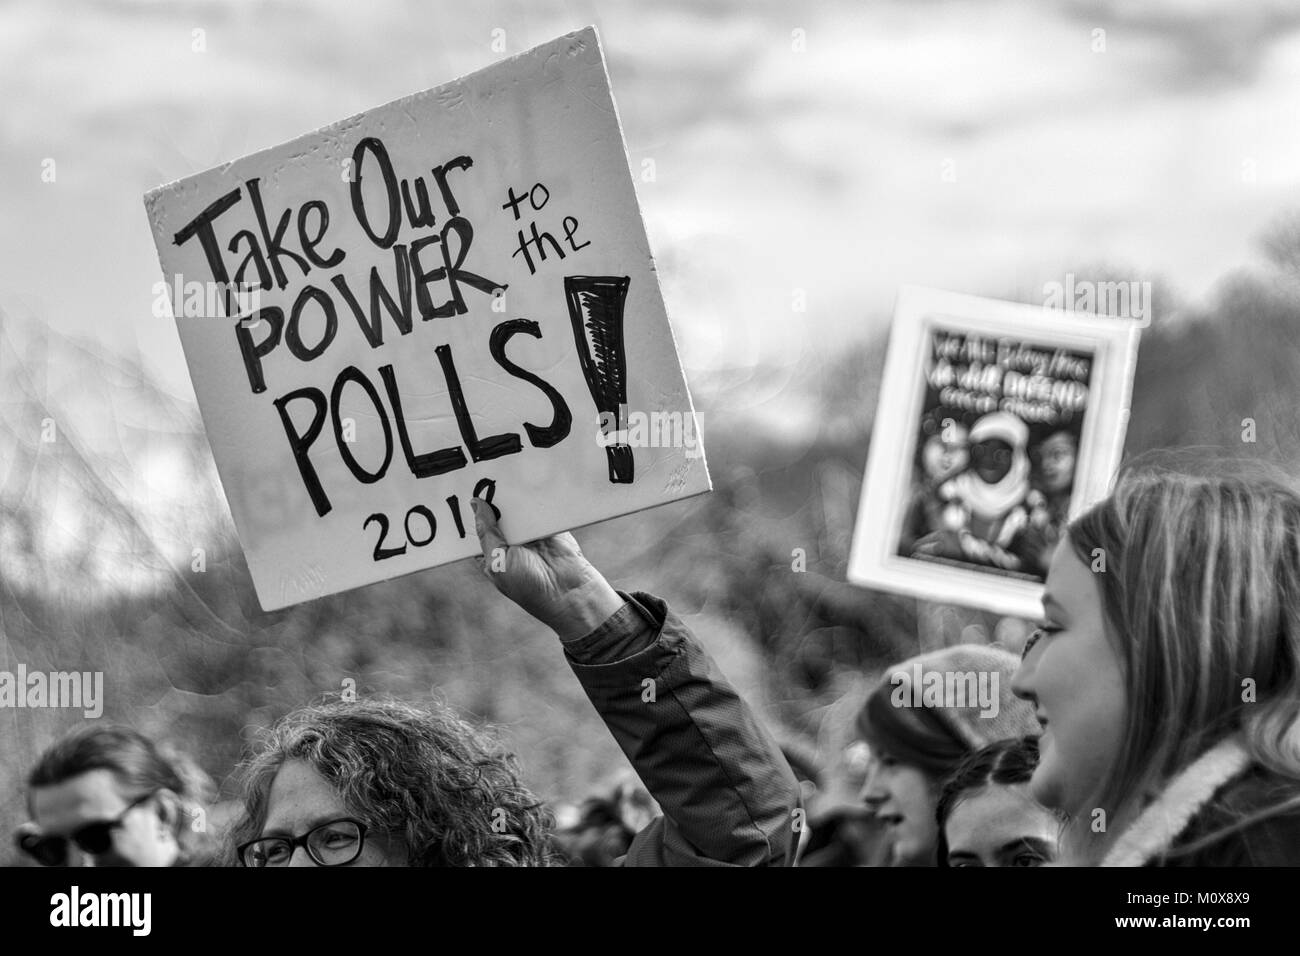 A woman holds up a sigh that says 'Take our power to the polls! 2018' at the Women's March Stock Photo